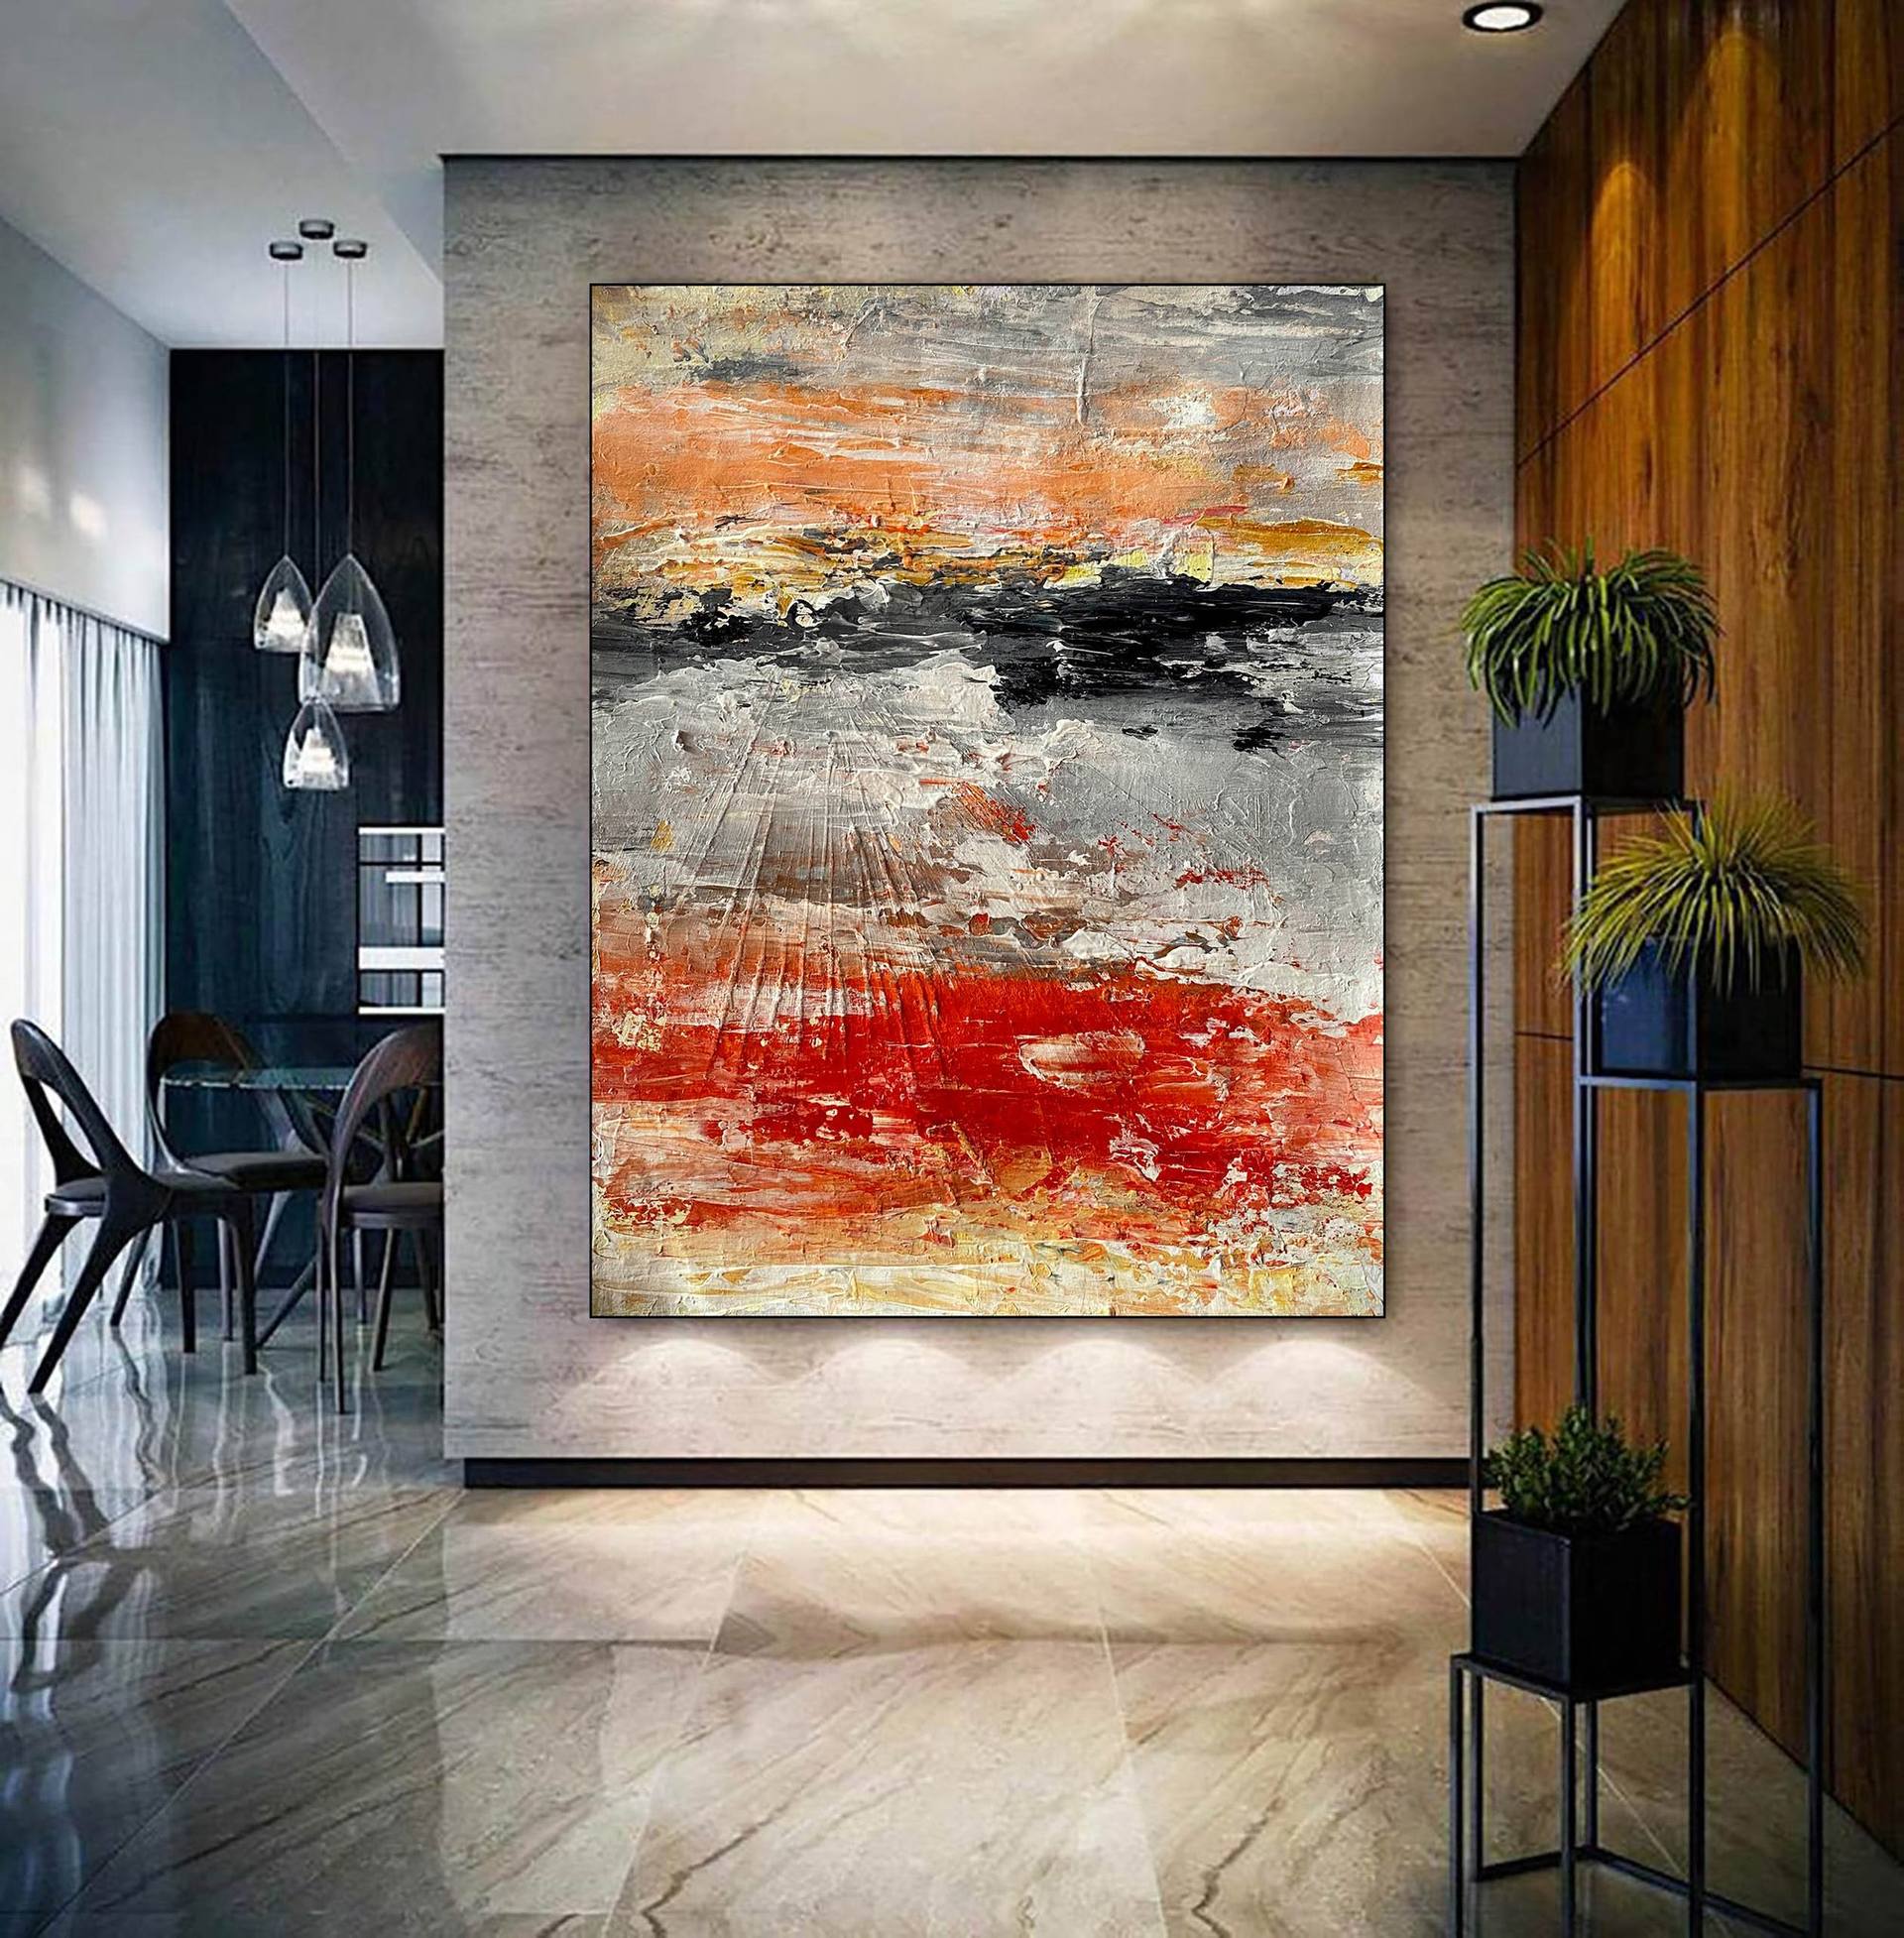 Minimalist Painting with Rich Textures,Modern and Clean-HLBW #J159L1 Oversized Canvas Art Extra Large Wall Art Abstract Landscape Painting